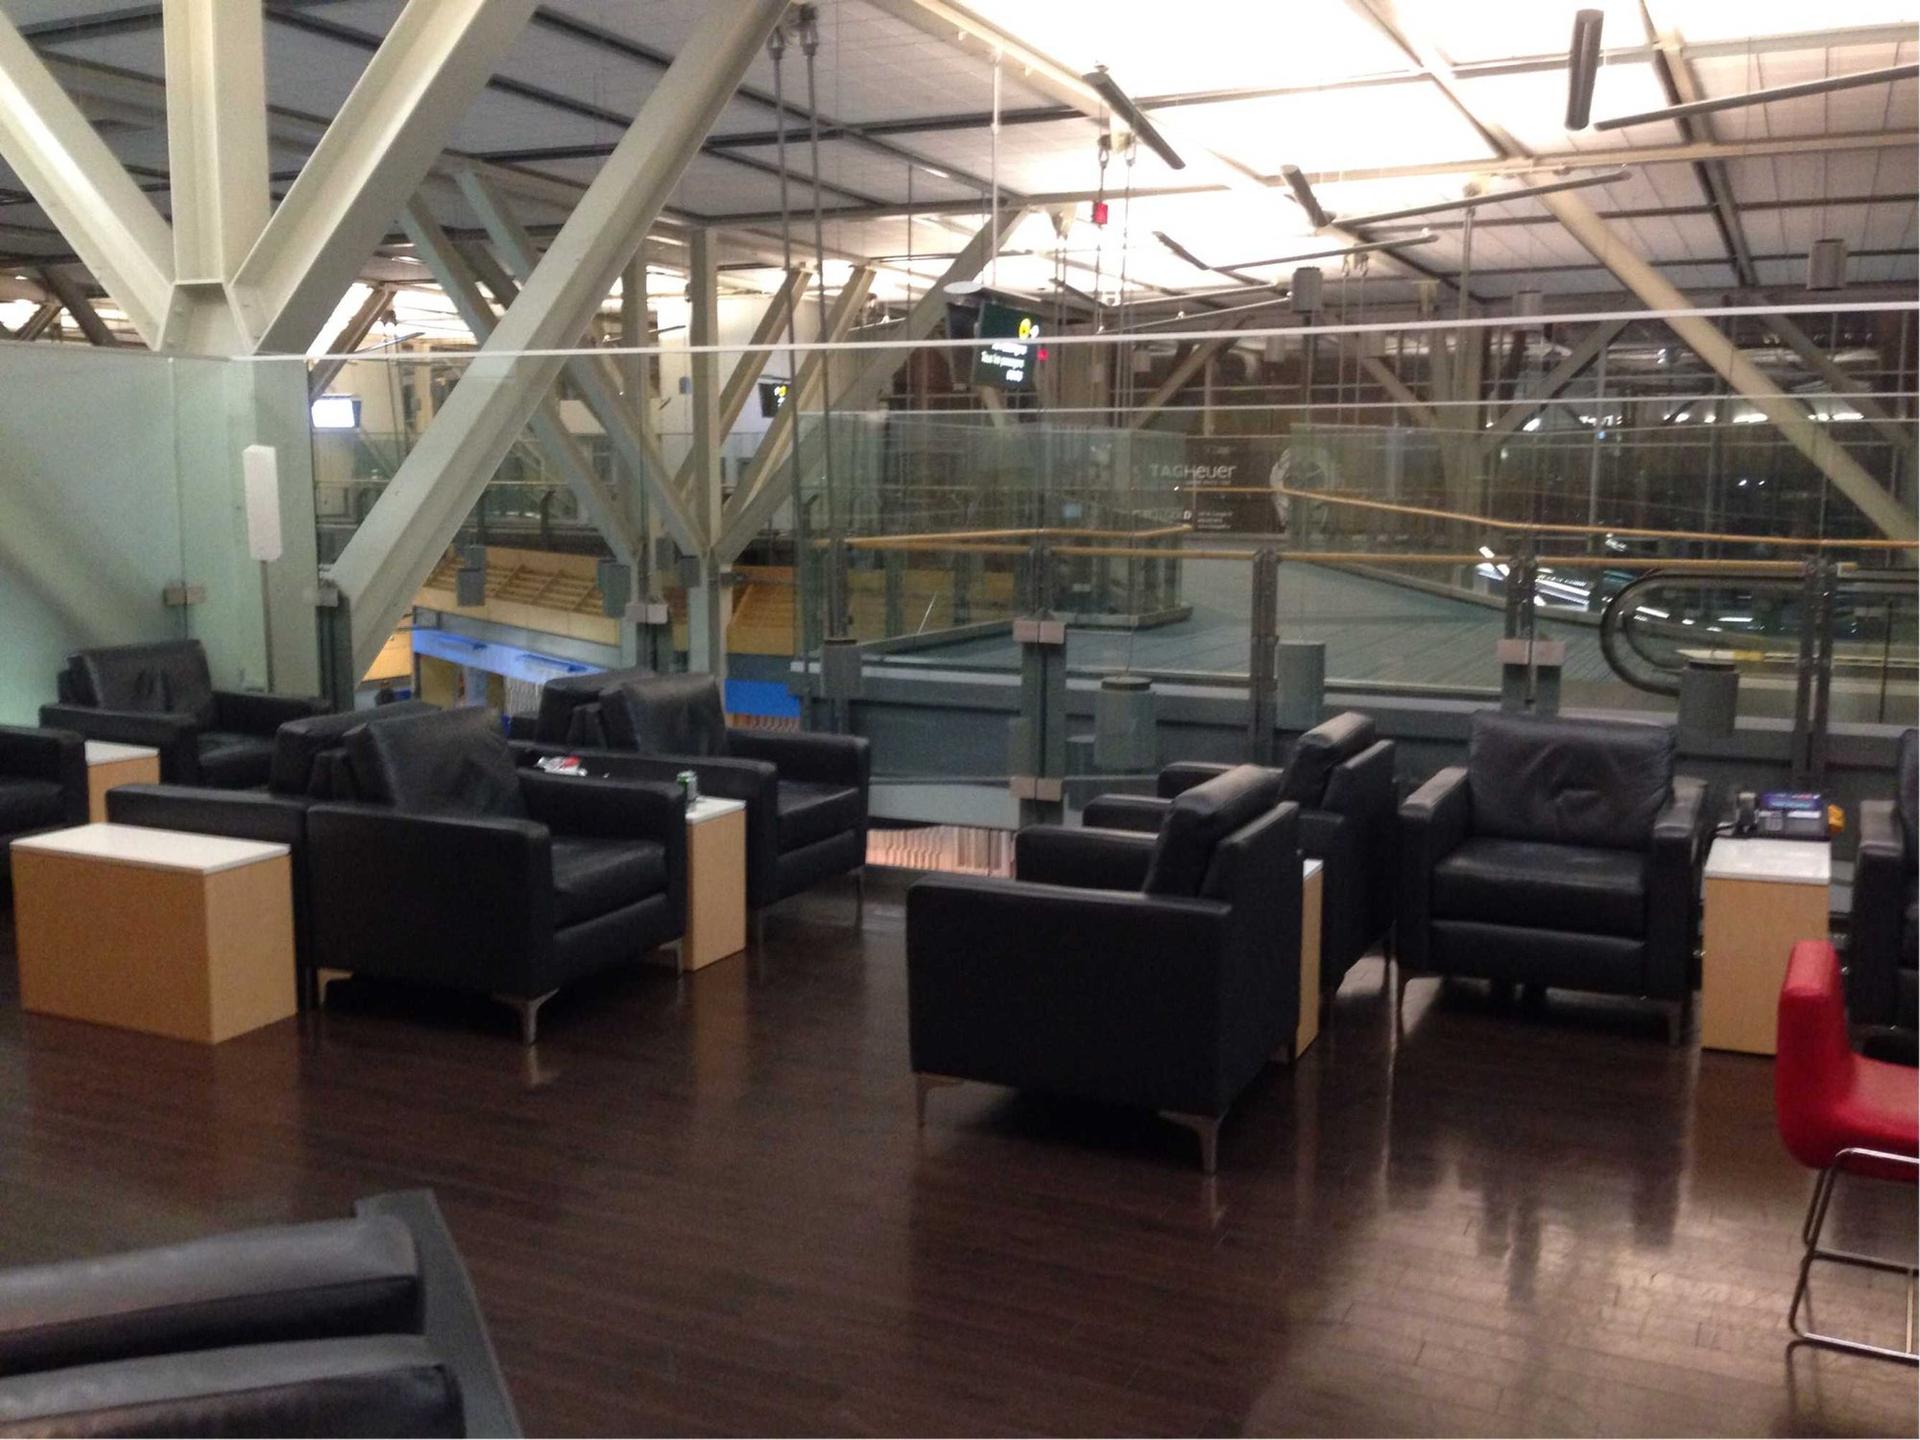 Air Canada Maple Leaf Lounge image 4 of 17